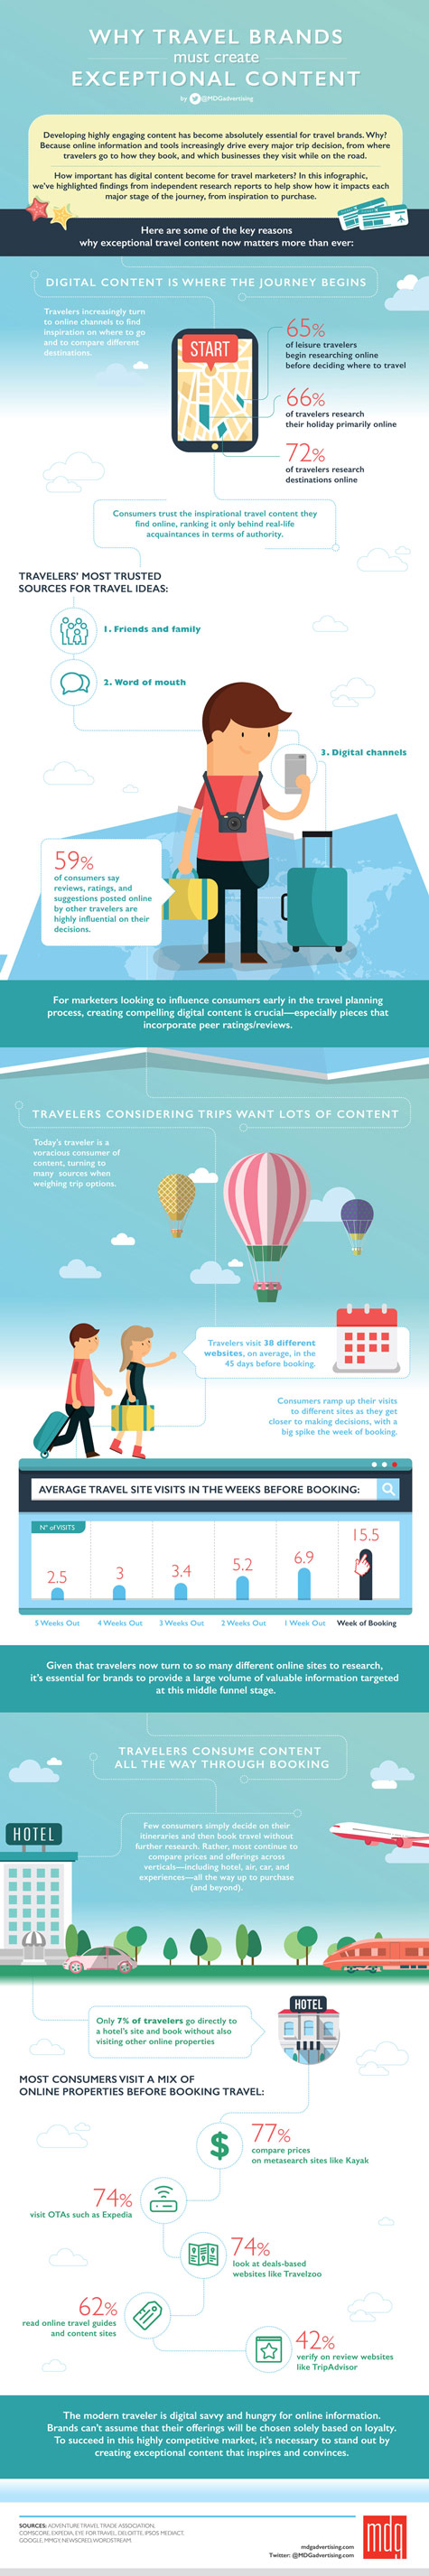 475 The 4 Keys to Creating Exceptional Travel Content in 2016 Infographic